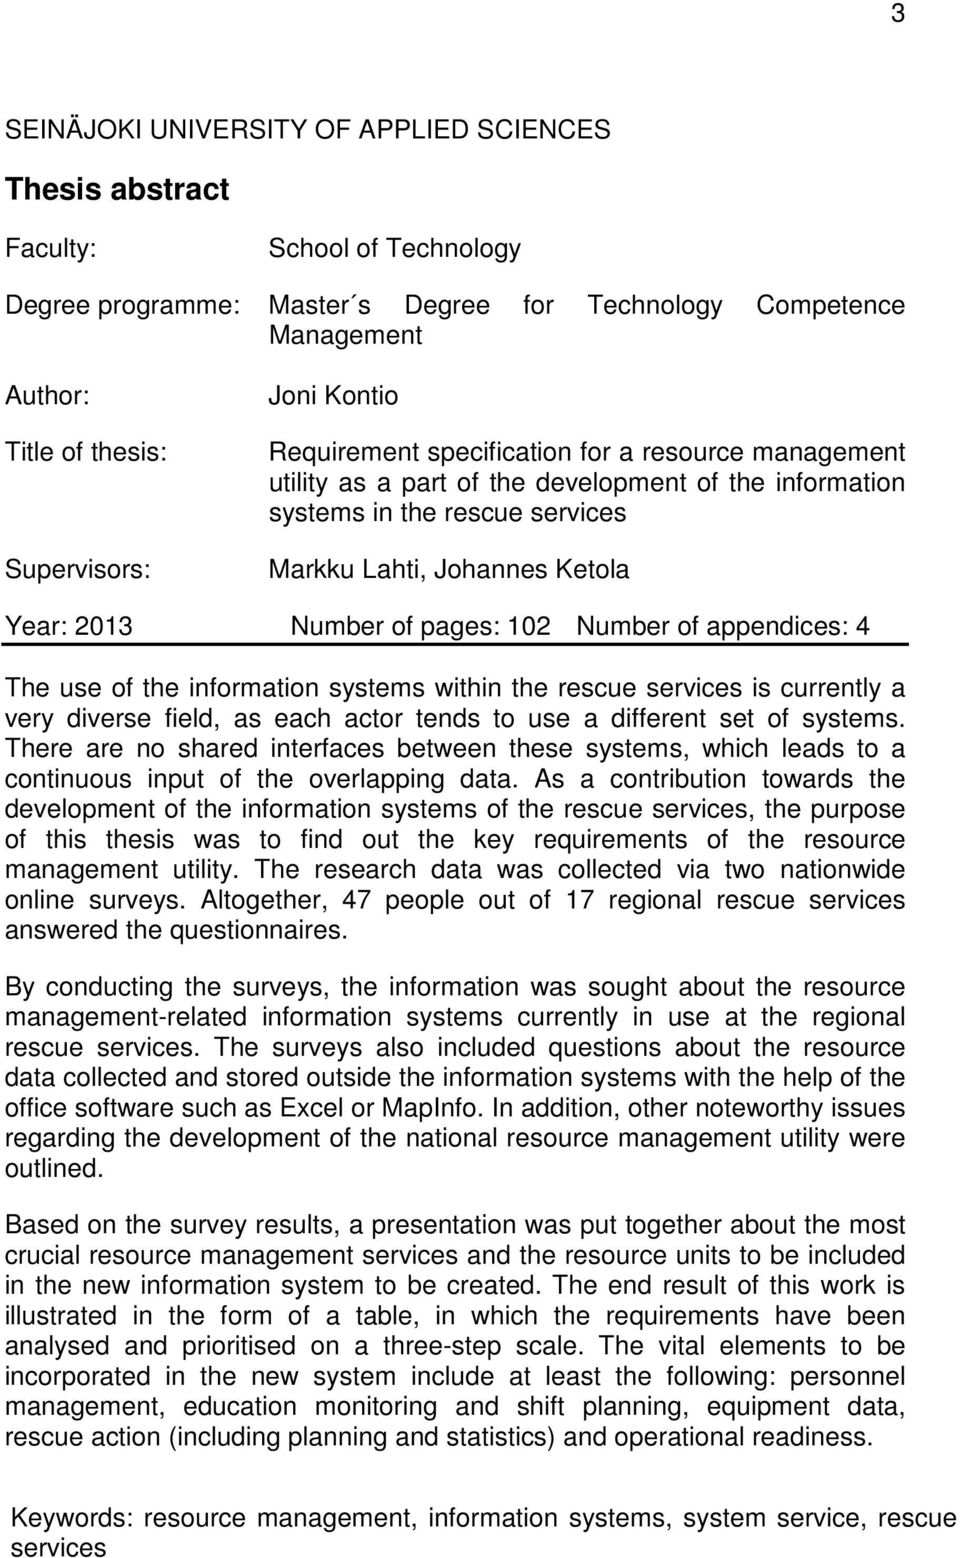 of pages: 102 Number of appendices: 4 The use of the information systems within the rescue services is currently a very diverse field, as each actor tends to use a different set of systems.